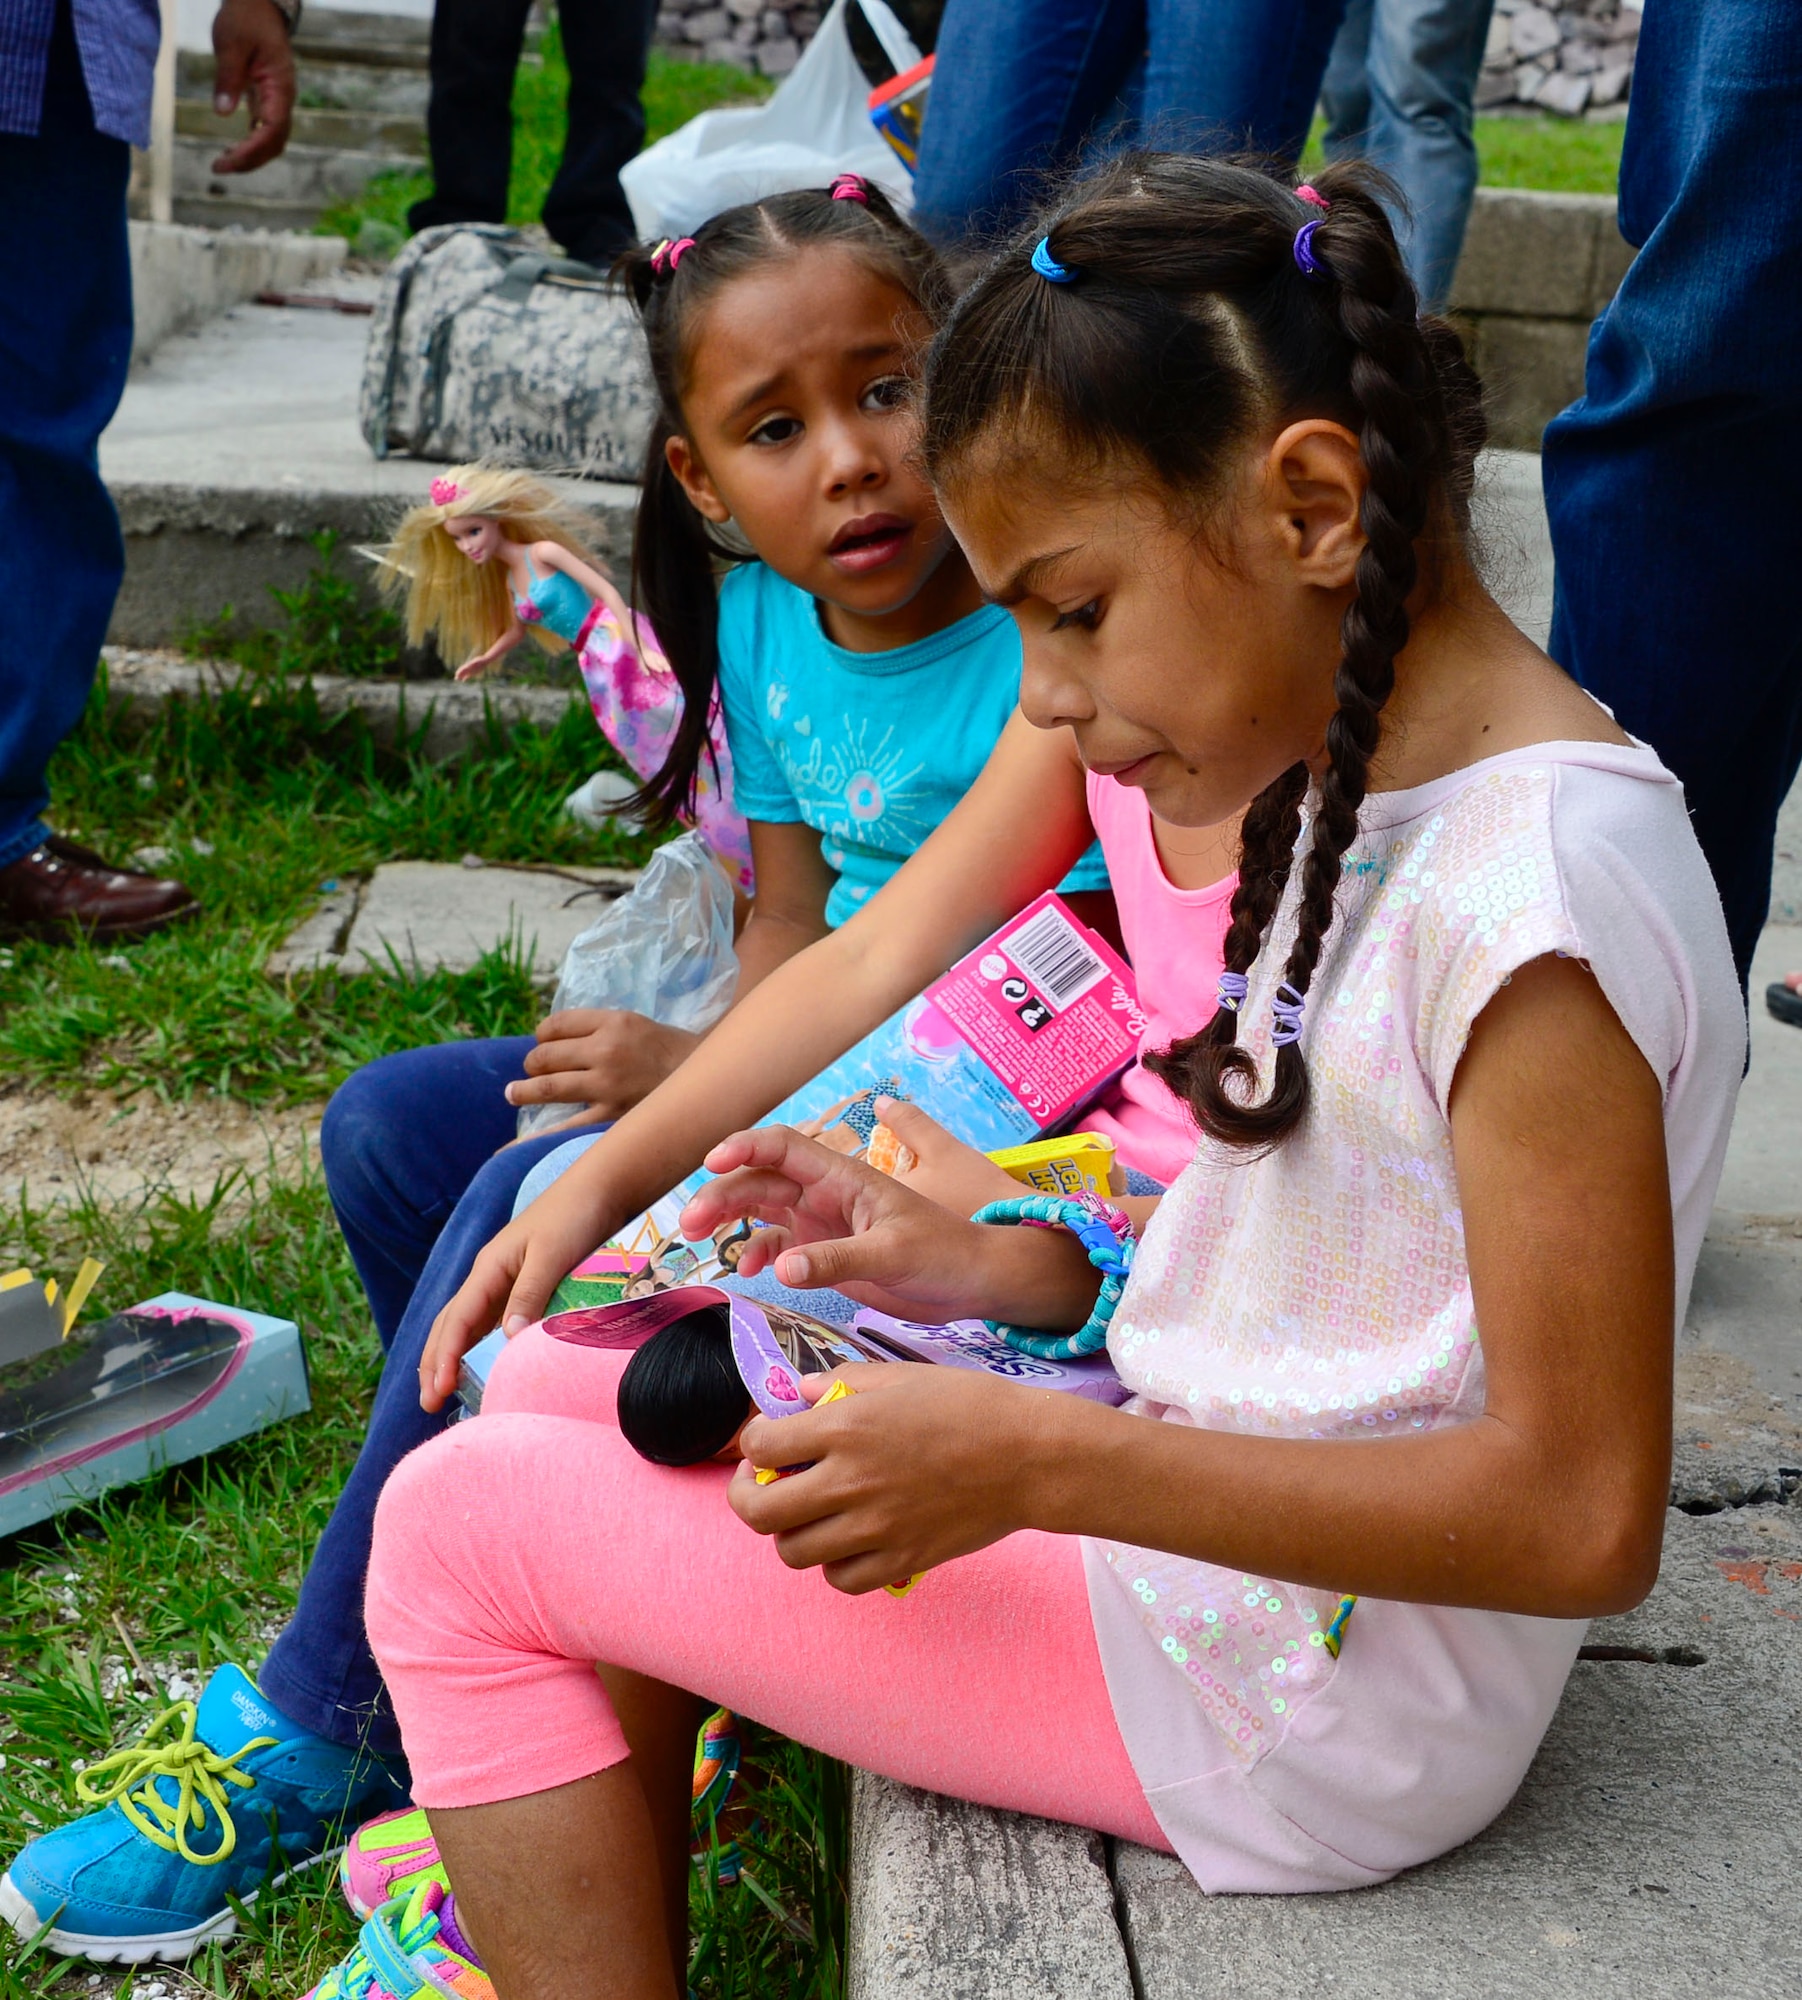 Young girls from the Casa de Corderitos orphanage in Tegucigalpa, Honduras play with their new Barbie dolls, June 18, 2015. The 12th AF (AFSOUTH) members spent some of their downtime during a three-day assessment visit to Honduras Air Bases to volunteer with the local community and to deliver toys and candy that were donated businesses in Tucson, Ariz. (U.S. Air Force photo by Tech. Sgt. Heather R. Redman/Released)